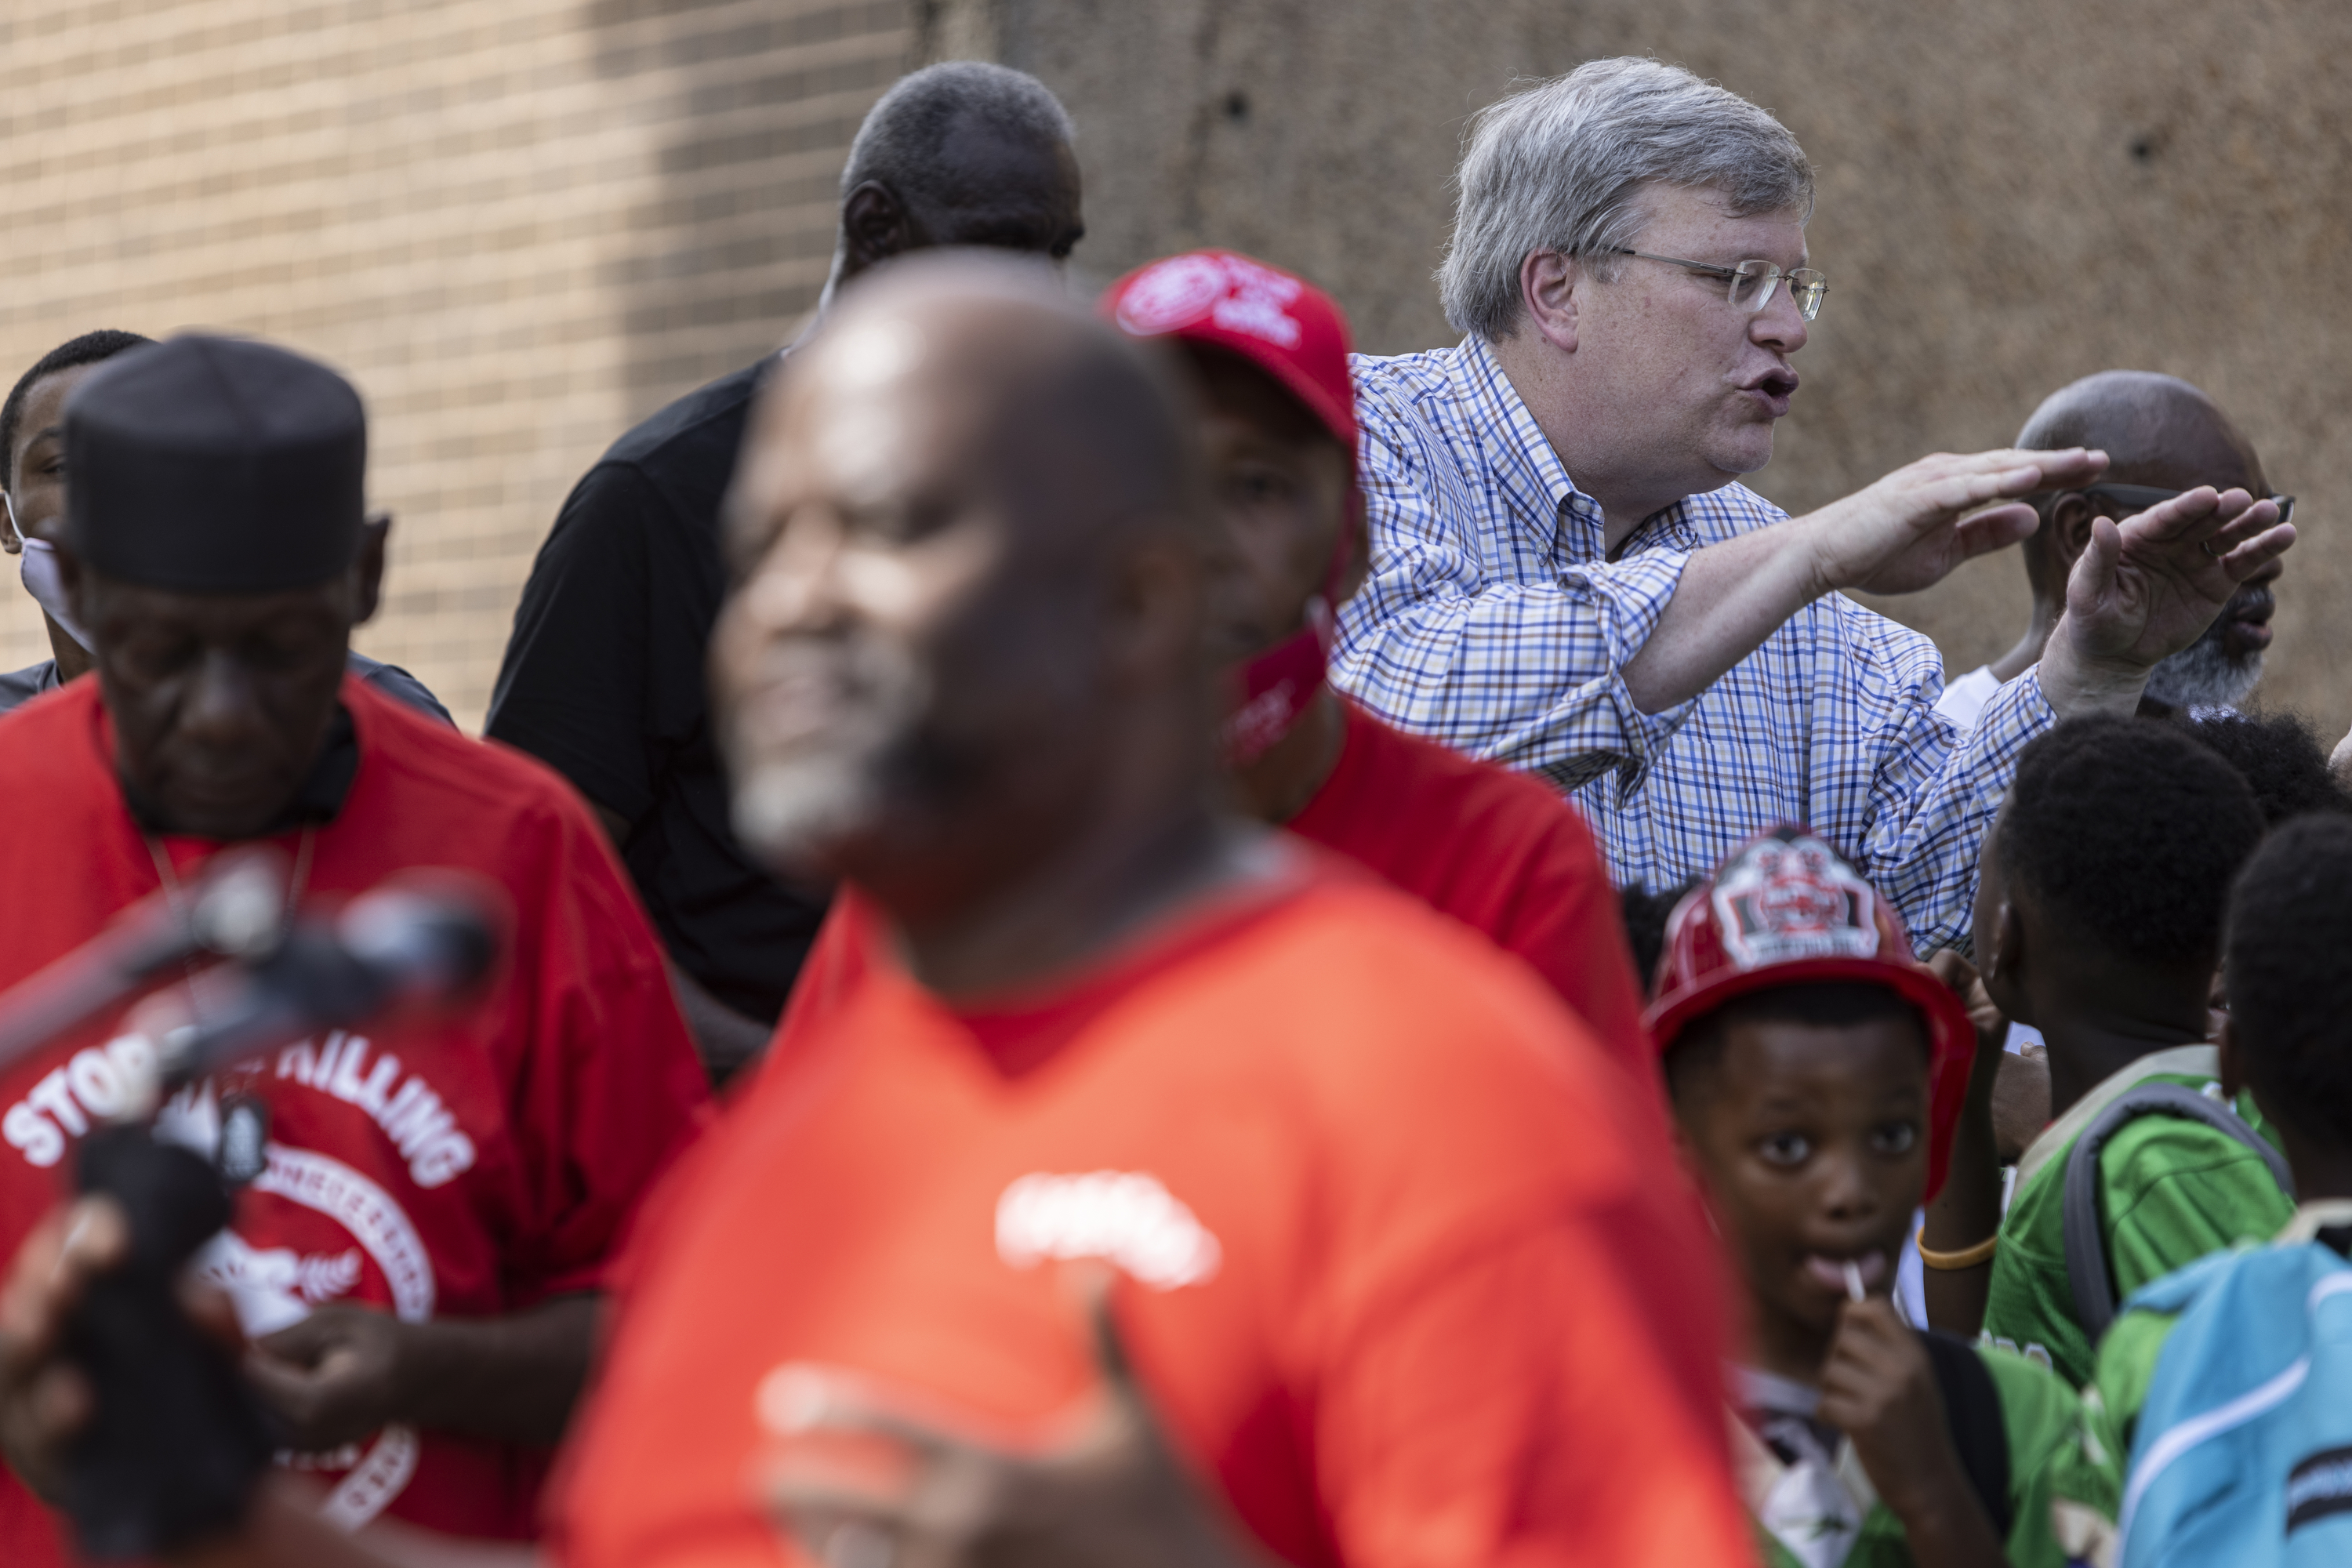 Jim Strickland talks to a group of young Black boys at an event. 